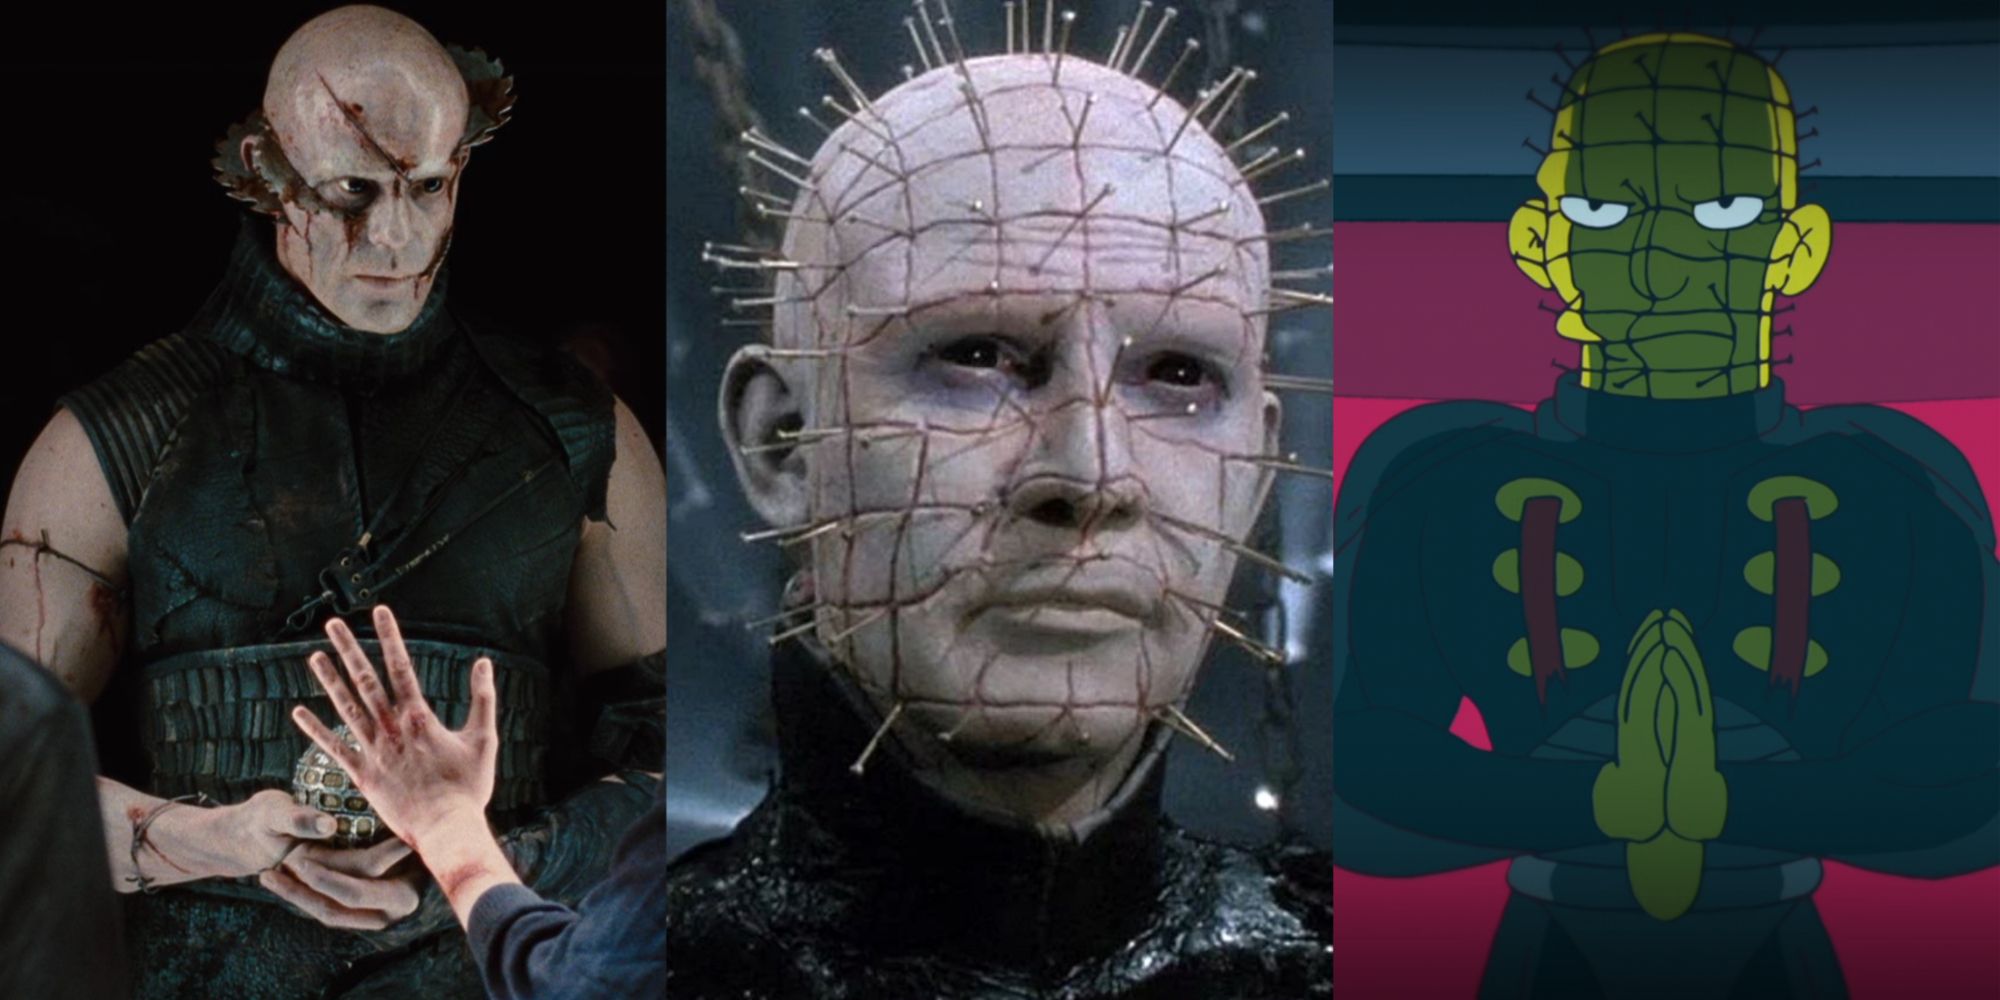 Split image of Pinhead the Hell Priest in Hellraiser, The Simpsons, and his analog in The Cabin In The Woods